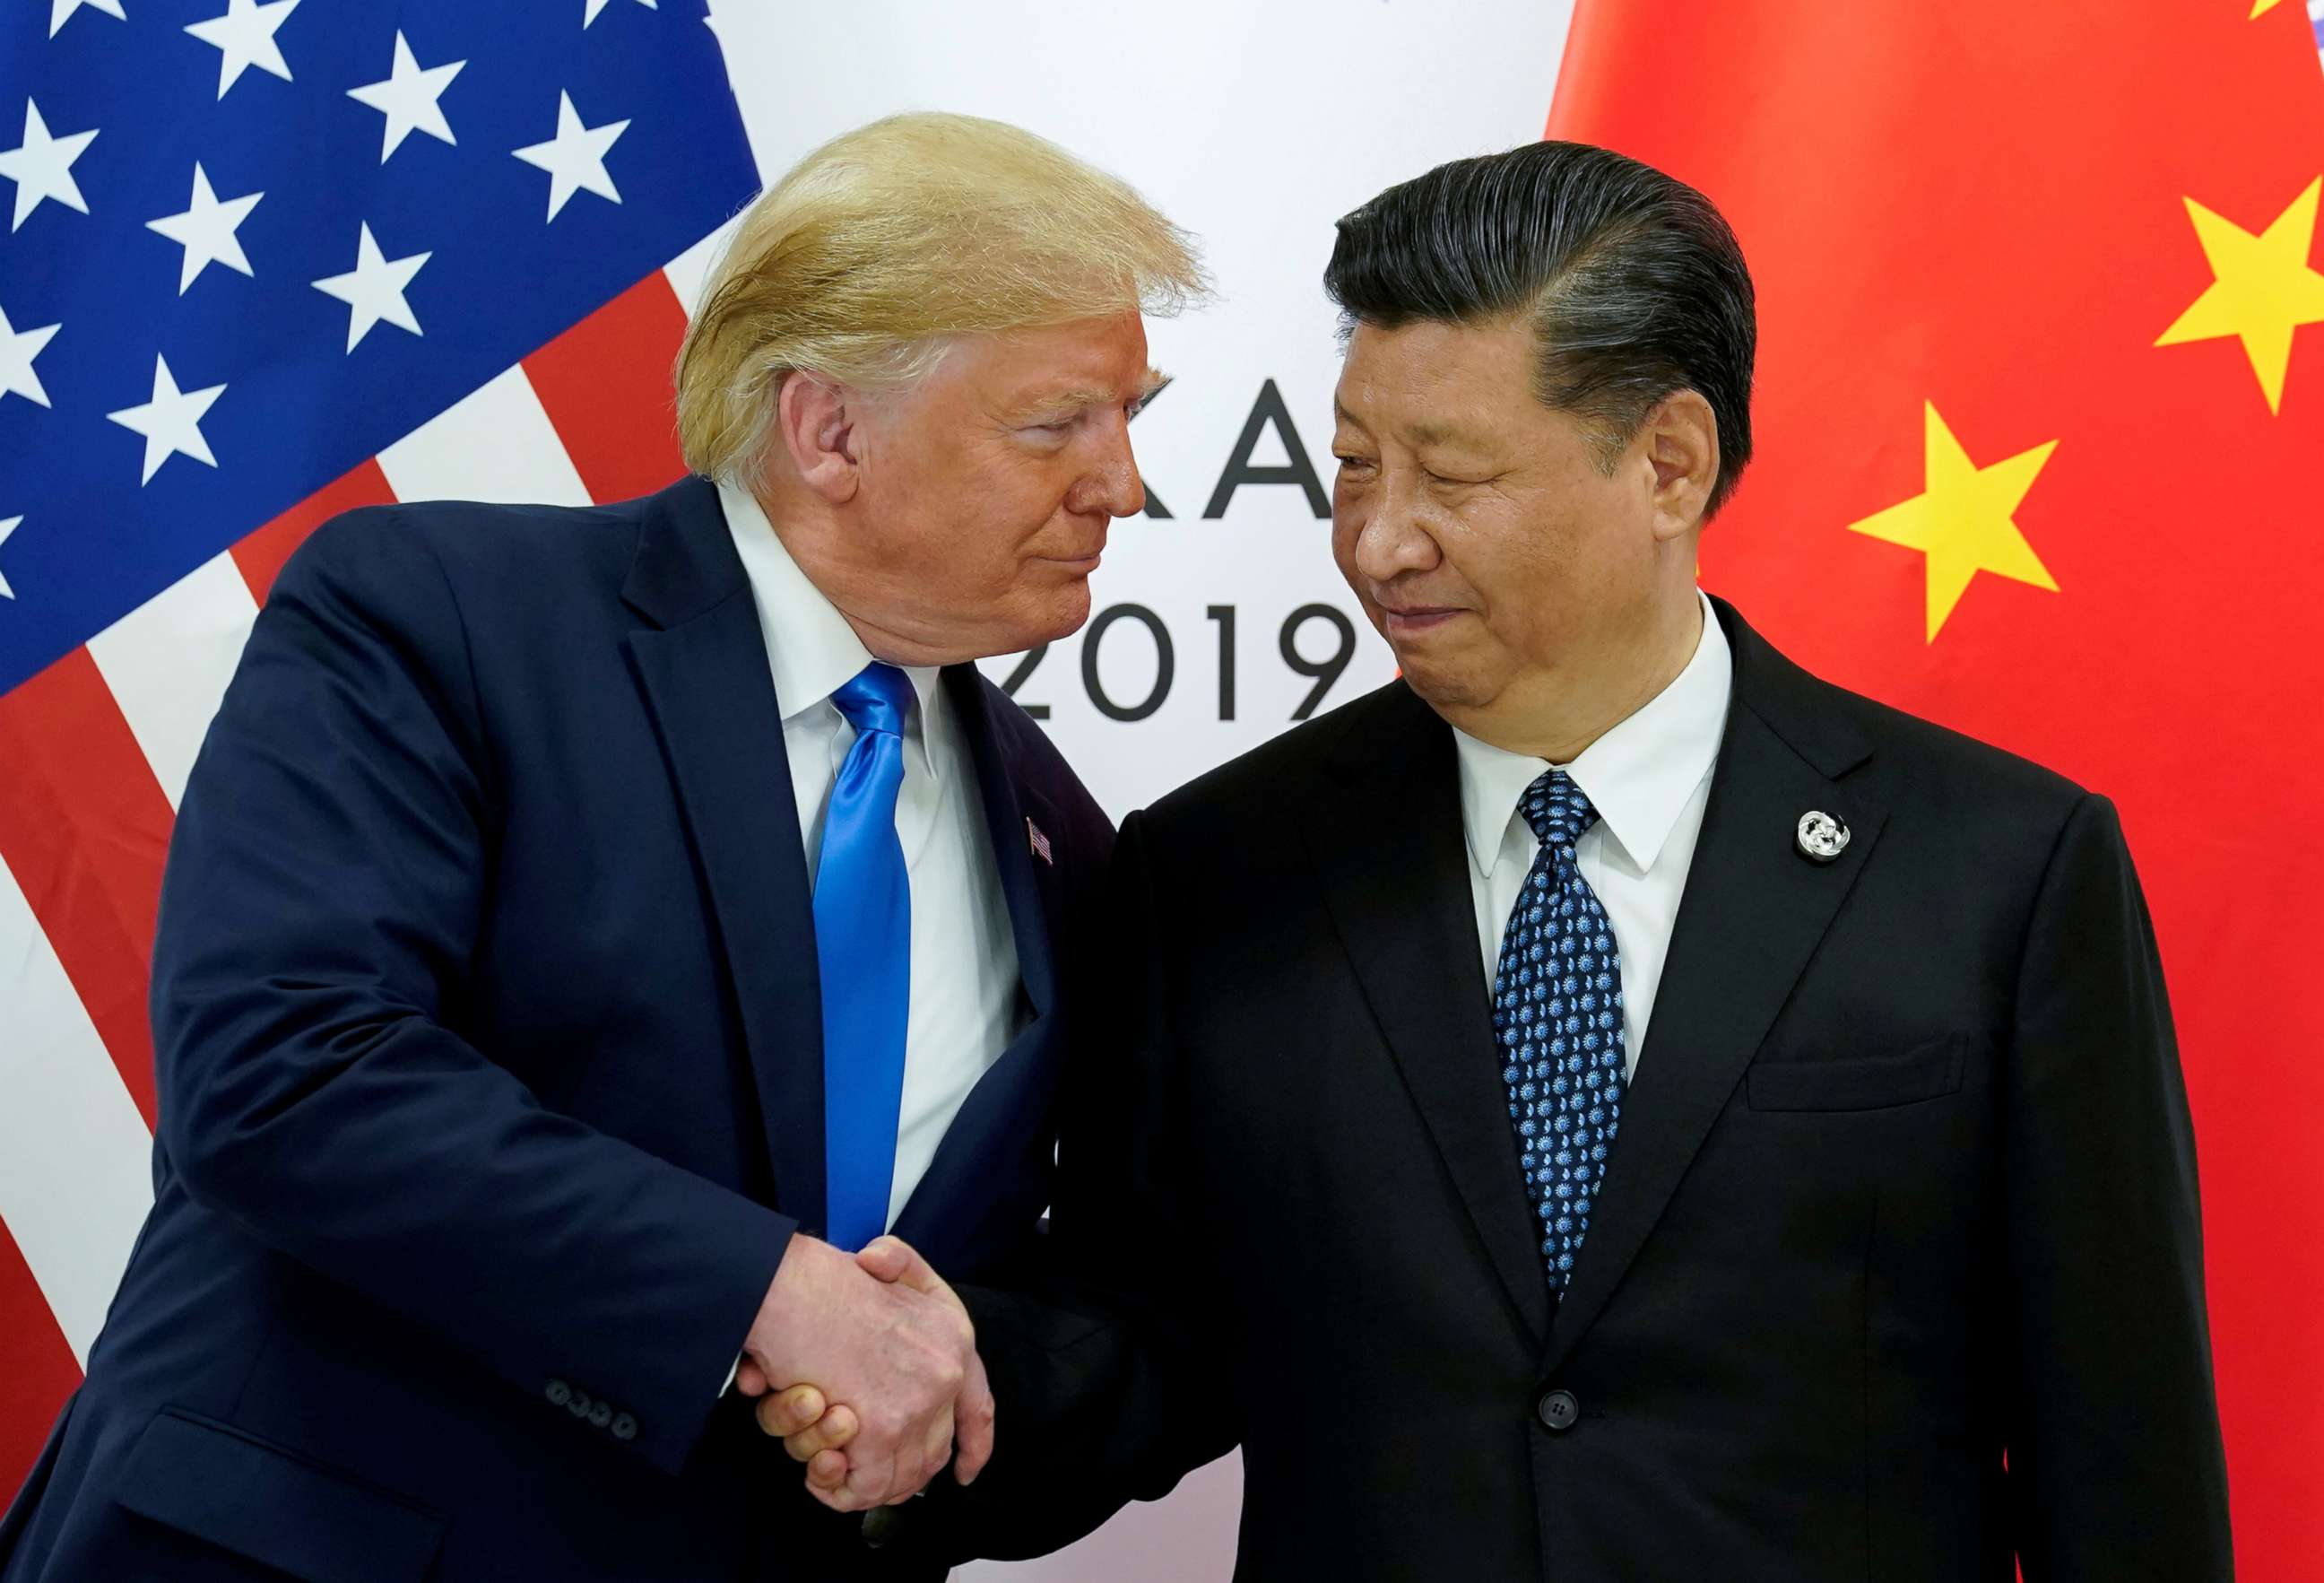 PHOTO: President Donald Trump meets with China's President Xi Jinping at the start of their bilateral meeting at the G20 leaders summit in Osaka, Japan, June 29, 2019.